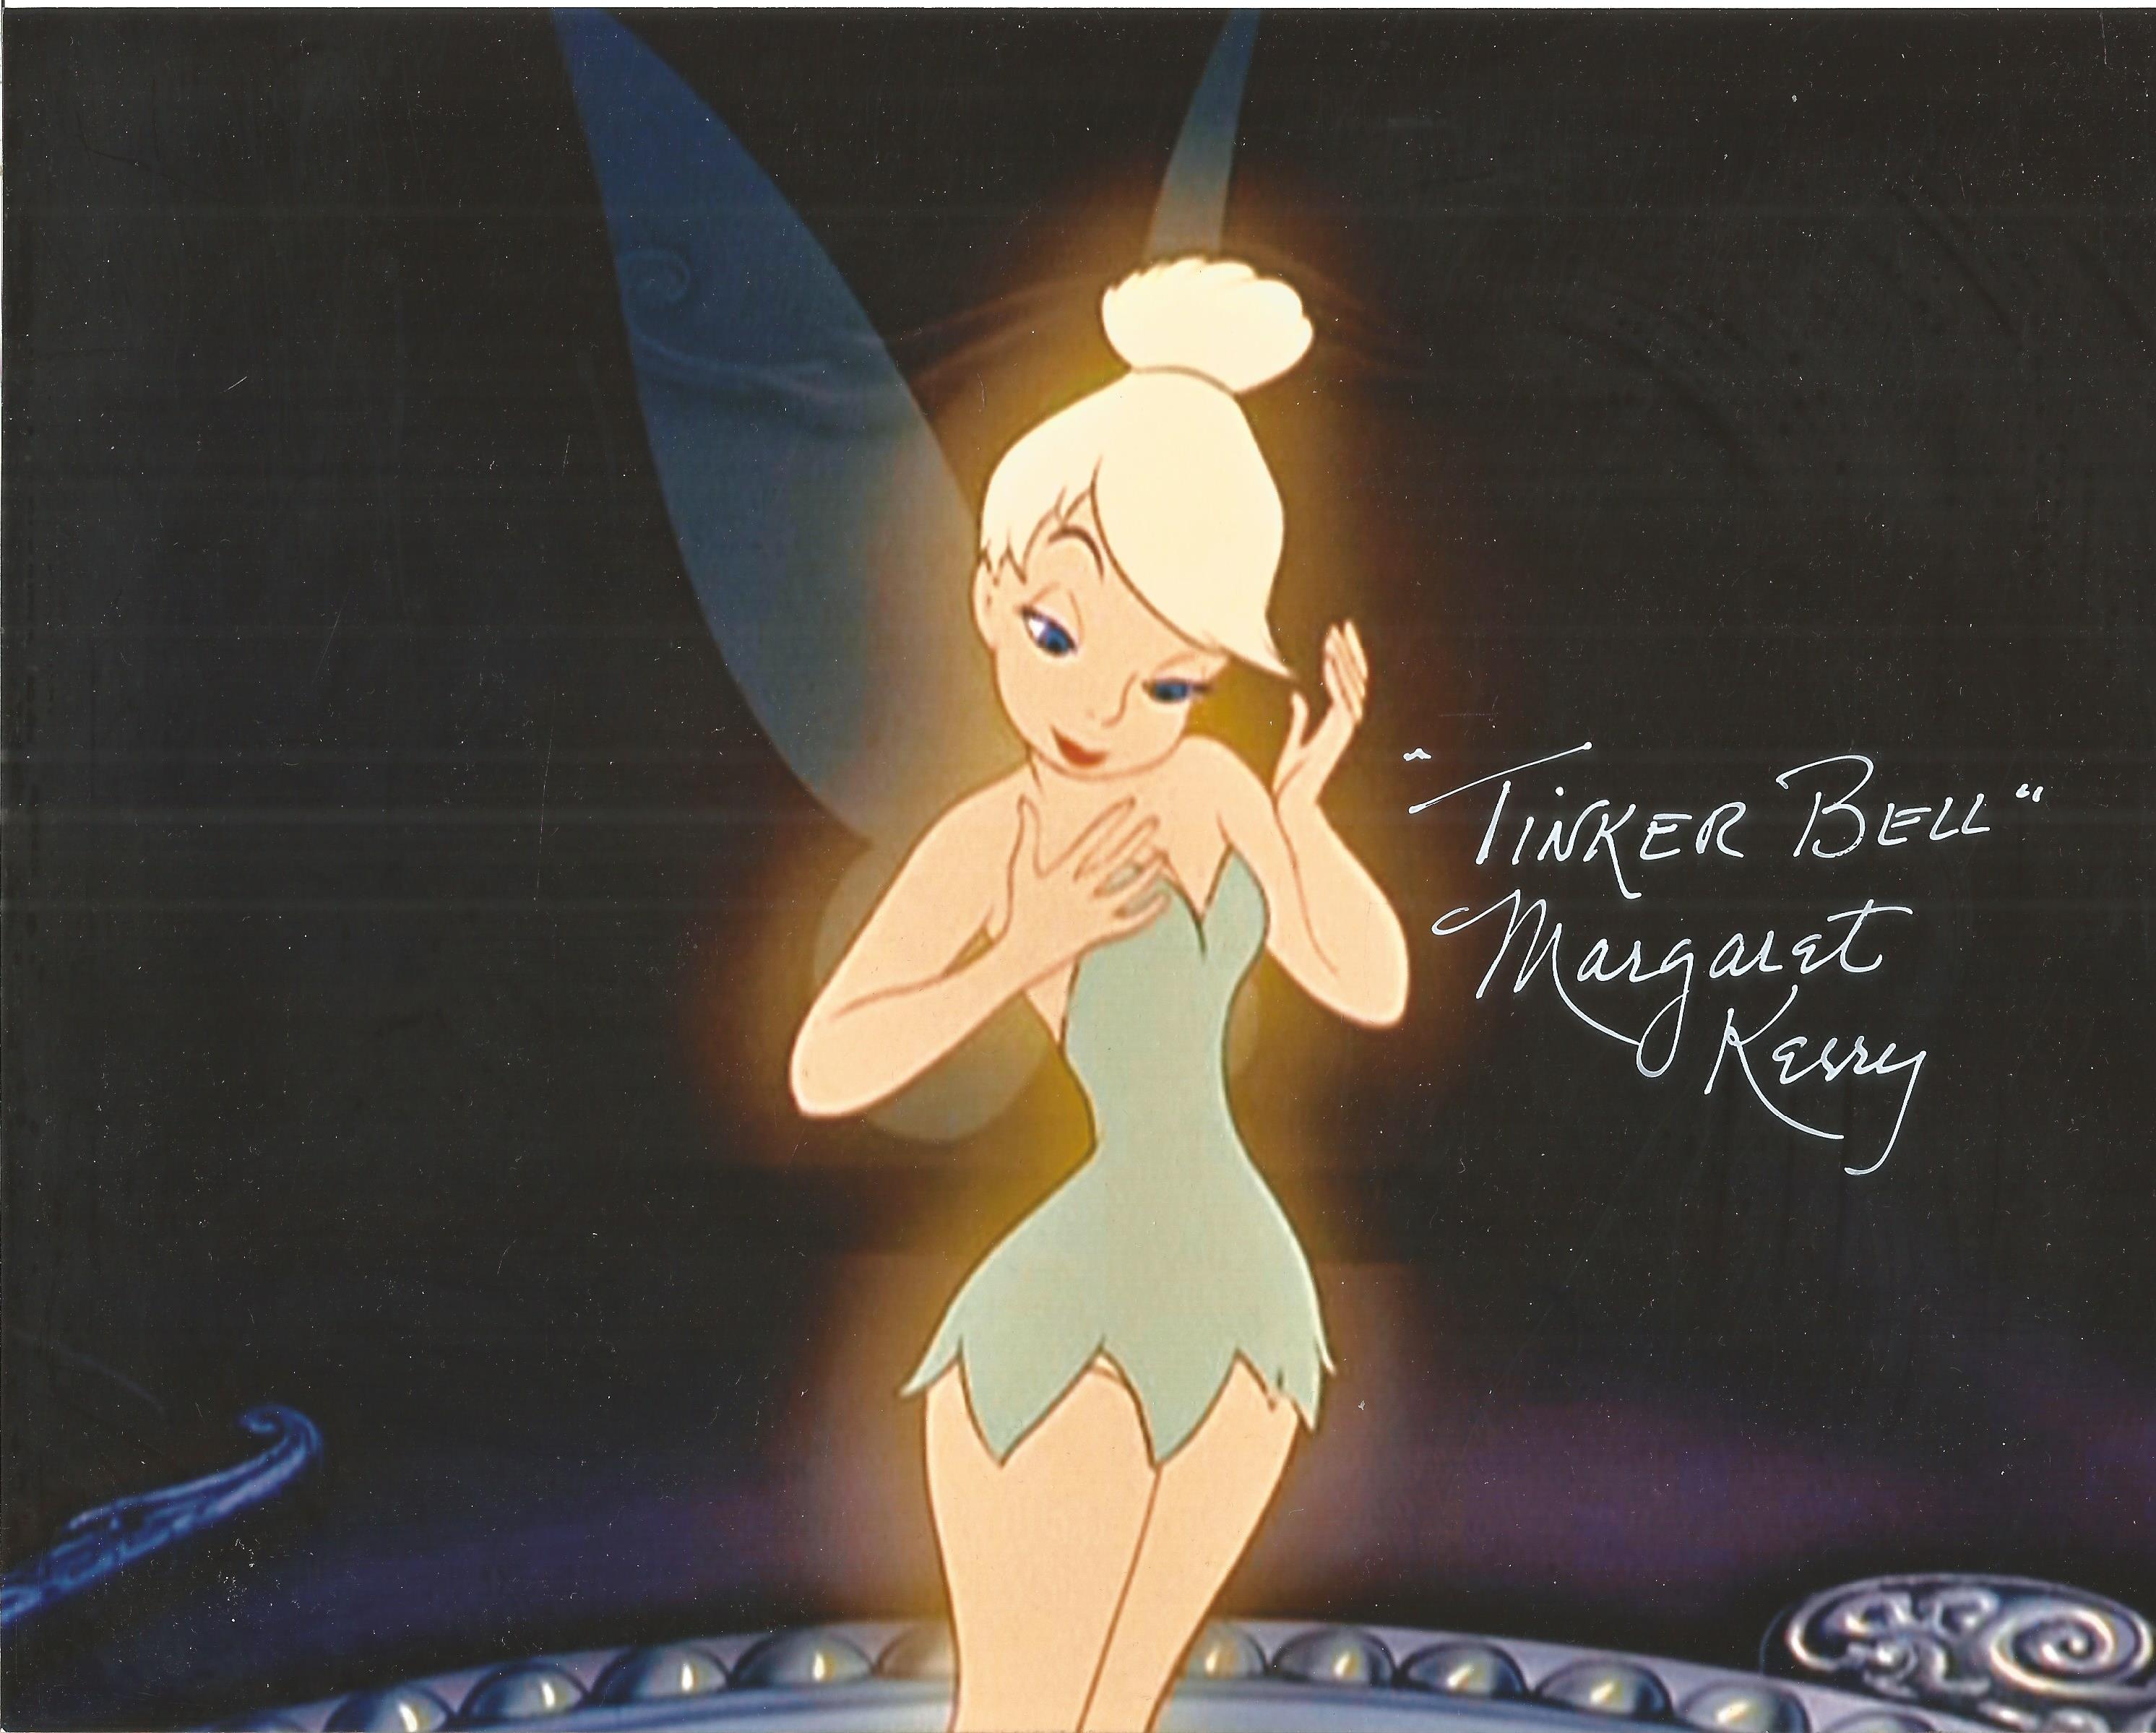 Margaret Kerry signed Tinkerbell 10x8 colour image. Margaret Kerry was an actress who was the